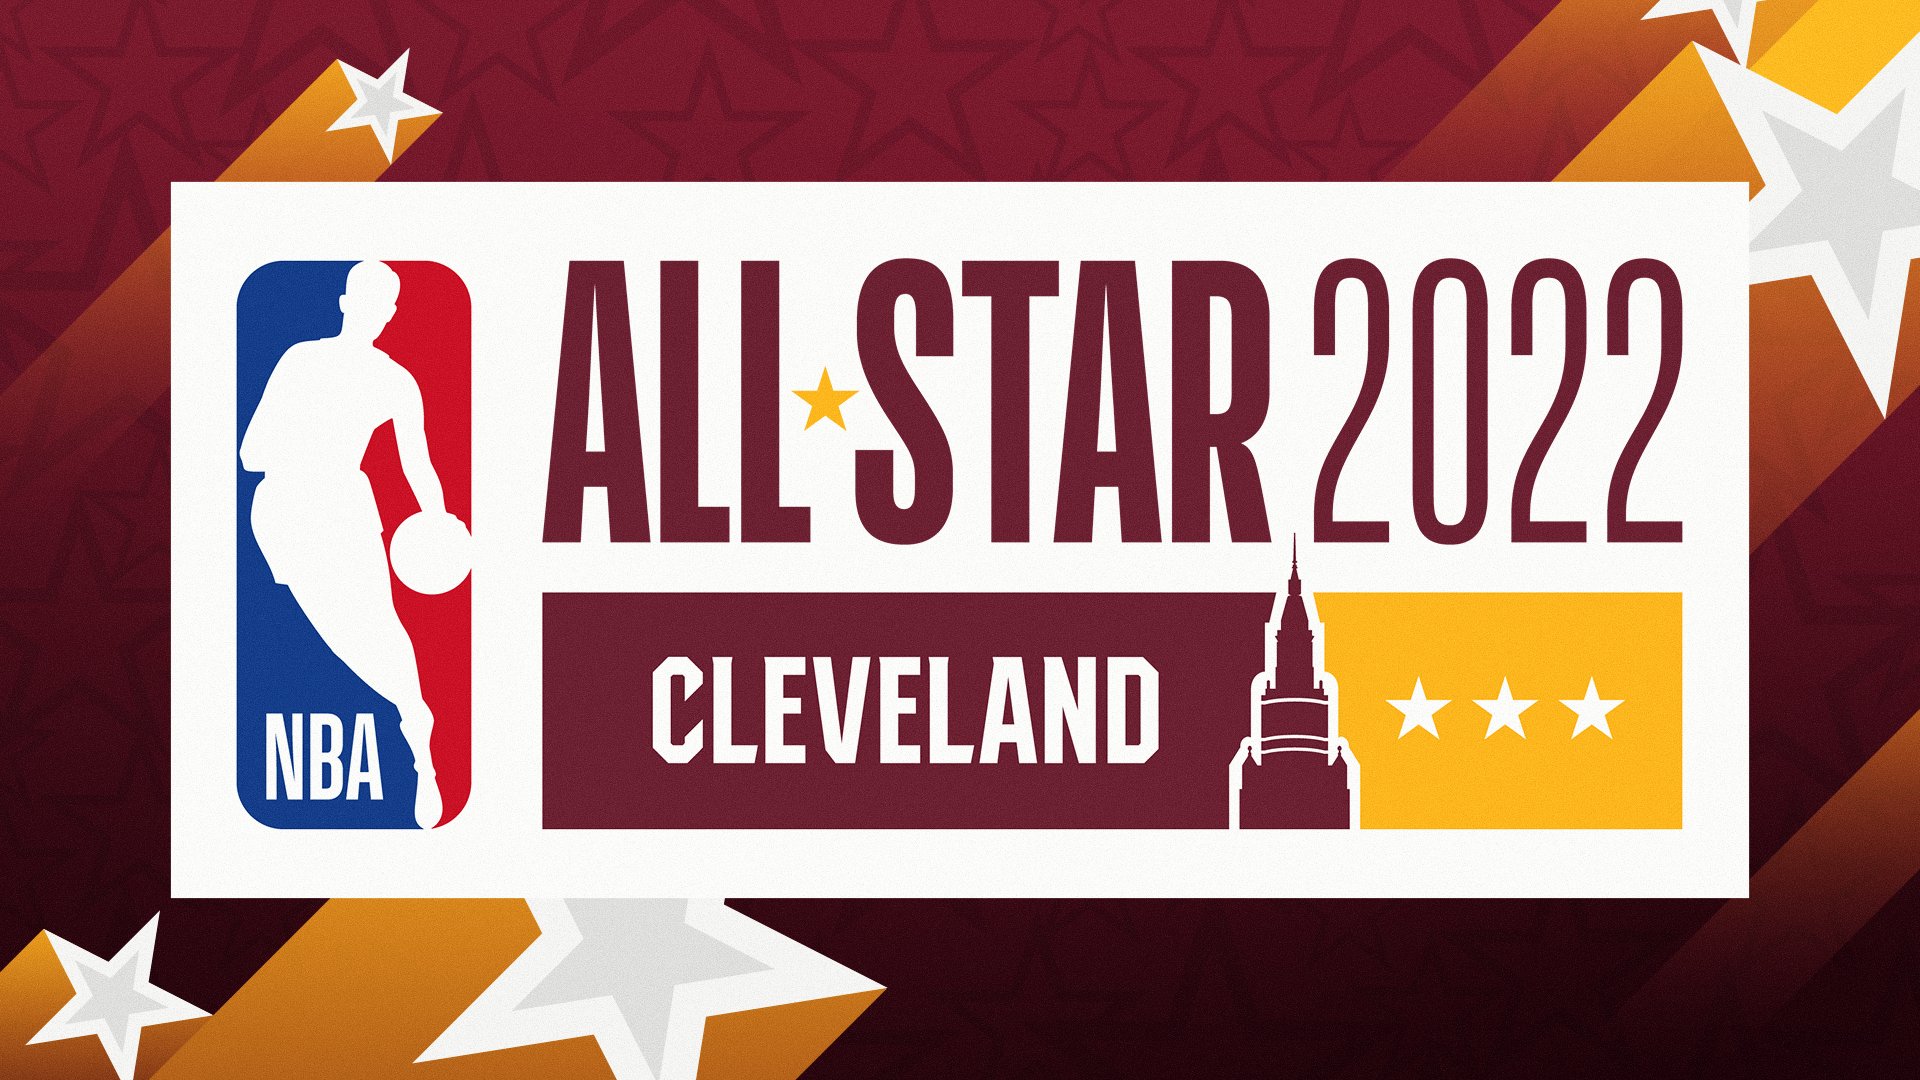 New NBA All Star Logo Is Missing Something (much To Fans' Relief)